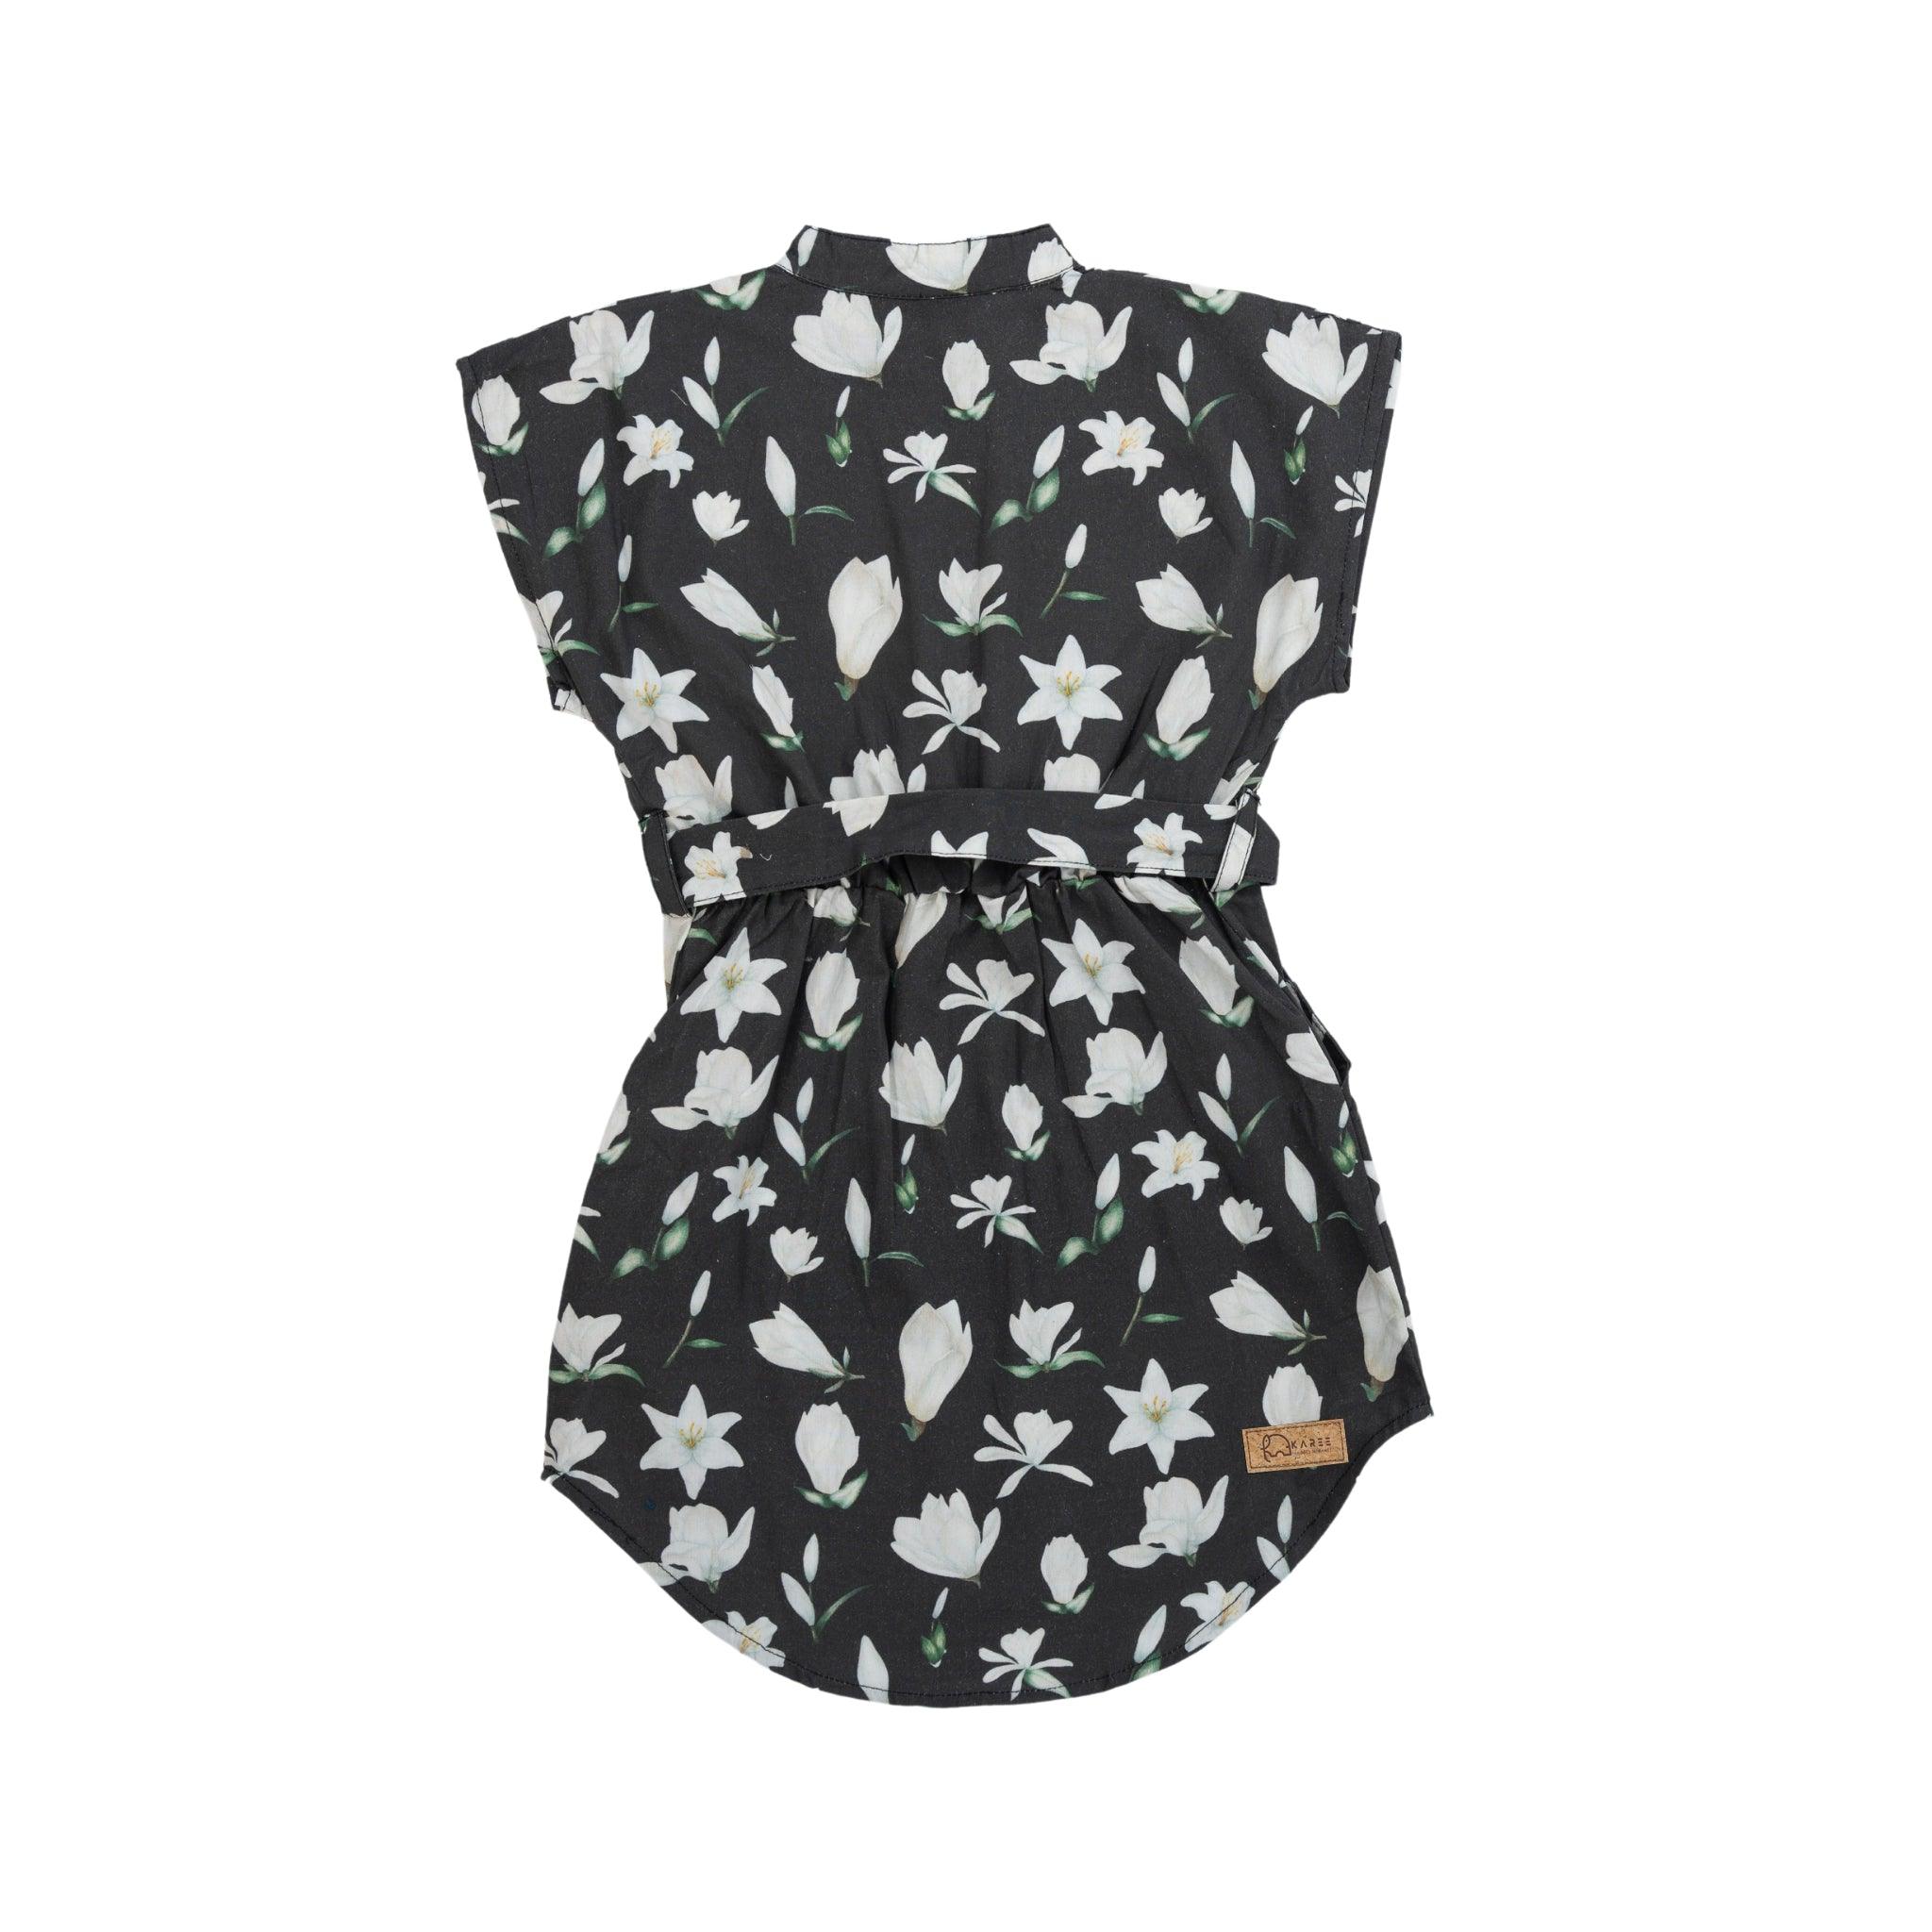 A sleeveless Black Lilly Blossom Cotton Shirt Dress with a white floral pattern, cinched at the waist with a tie, crafted in eco-friendly poplin cotton, displayed against a white background by Karee.